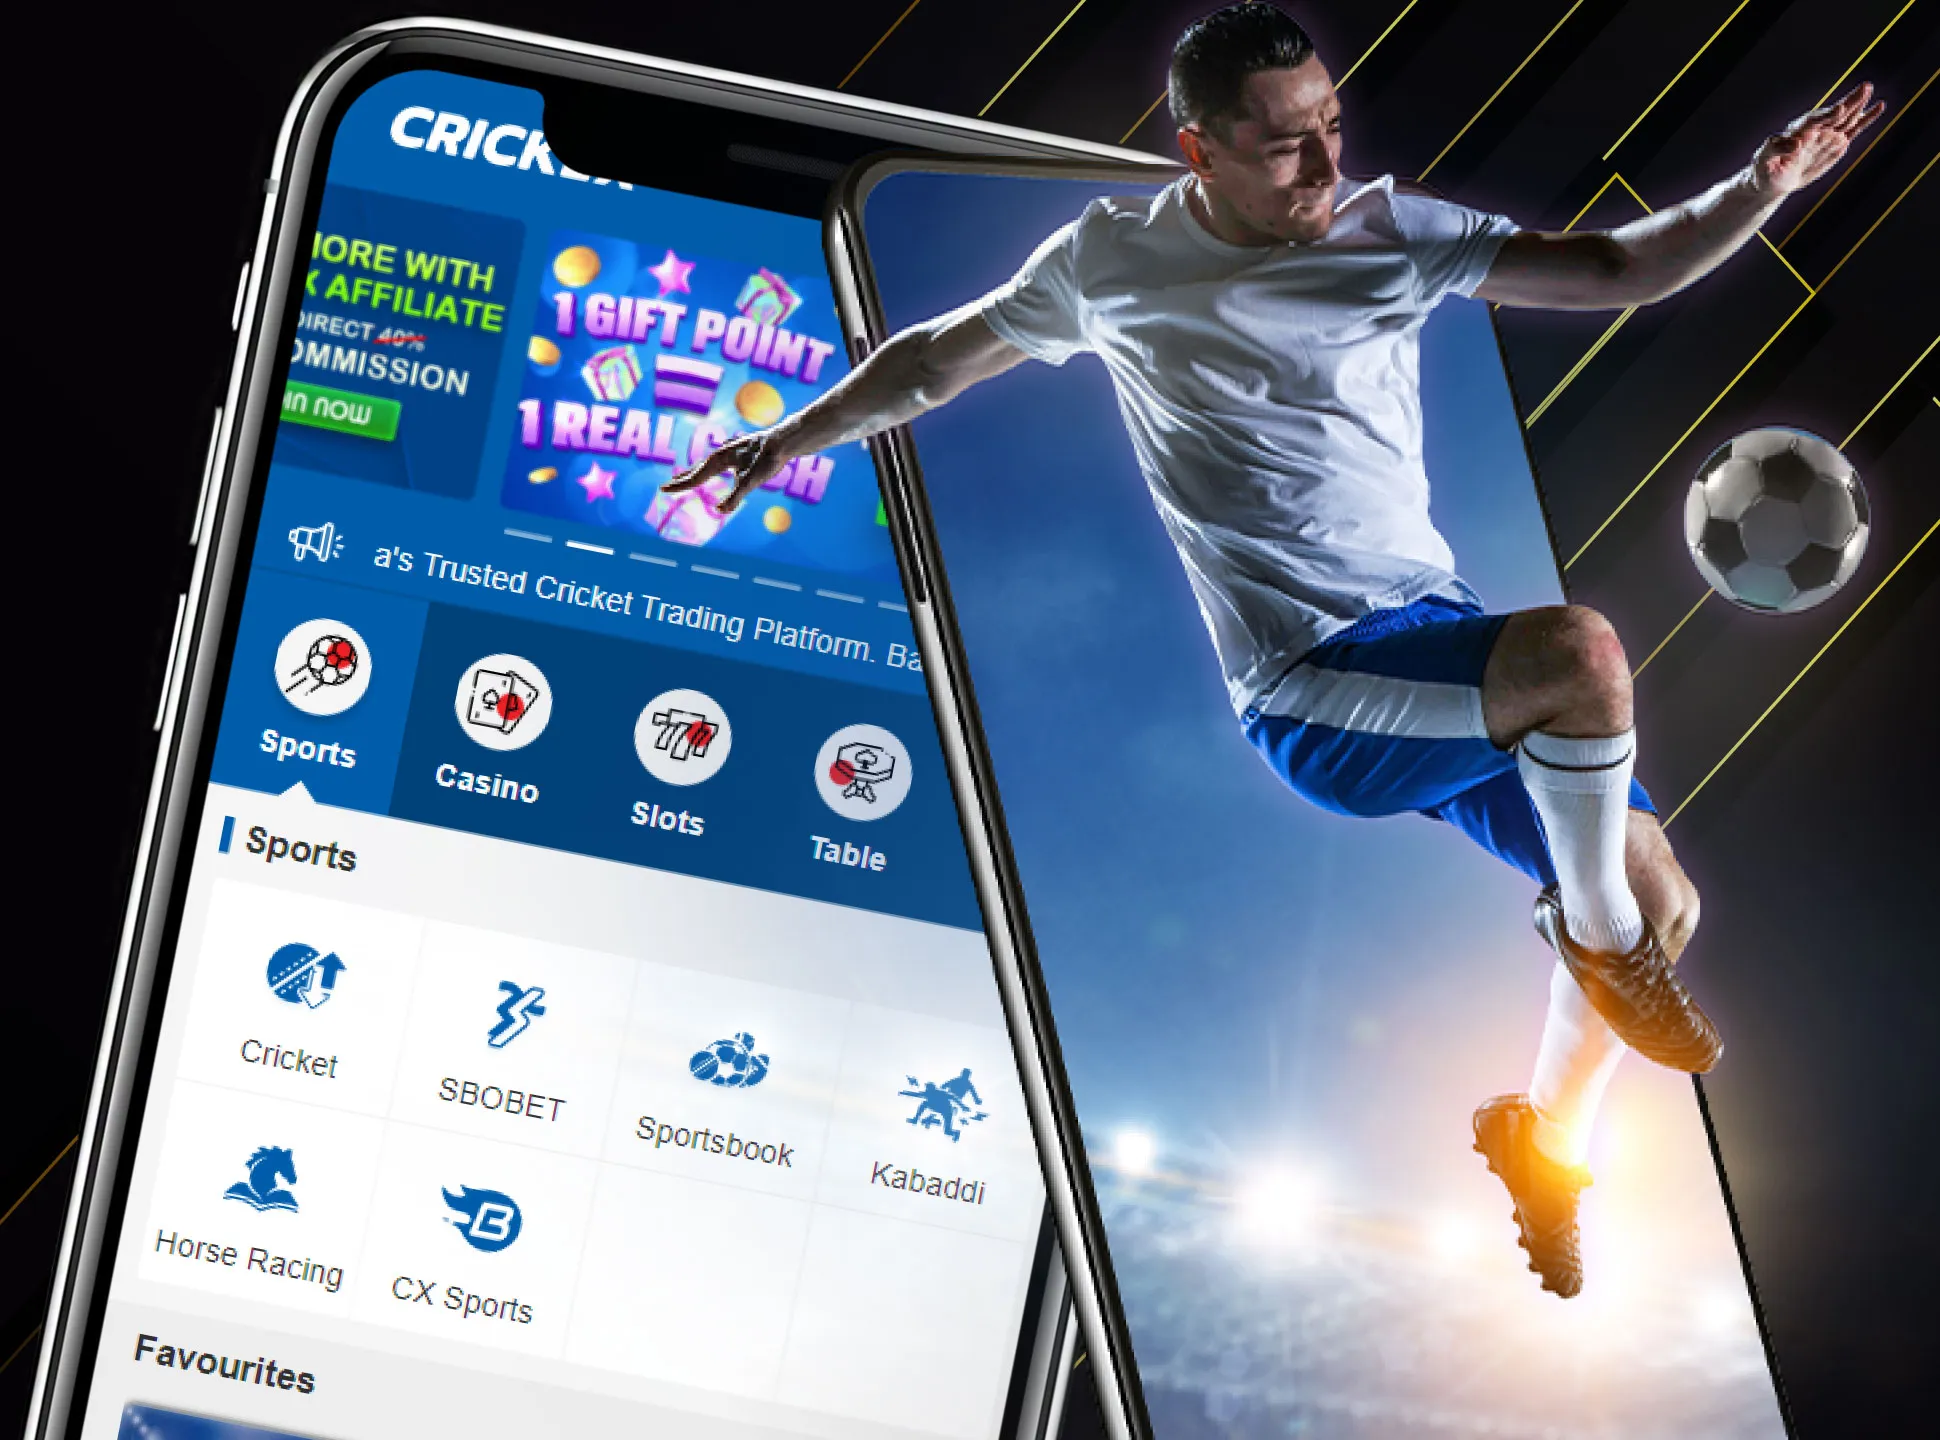 You can place bets on various sports in the Crickex app.